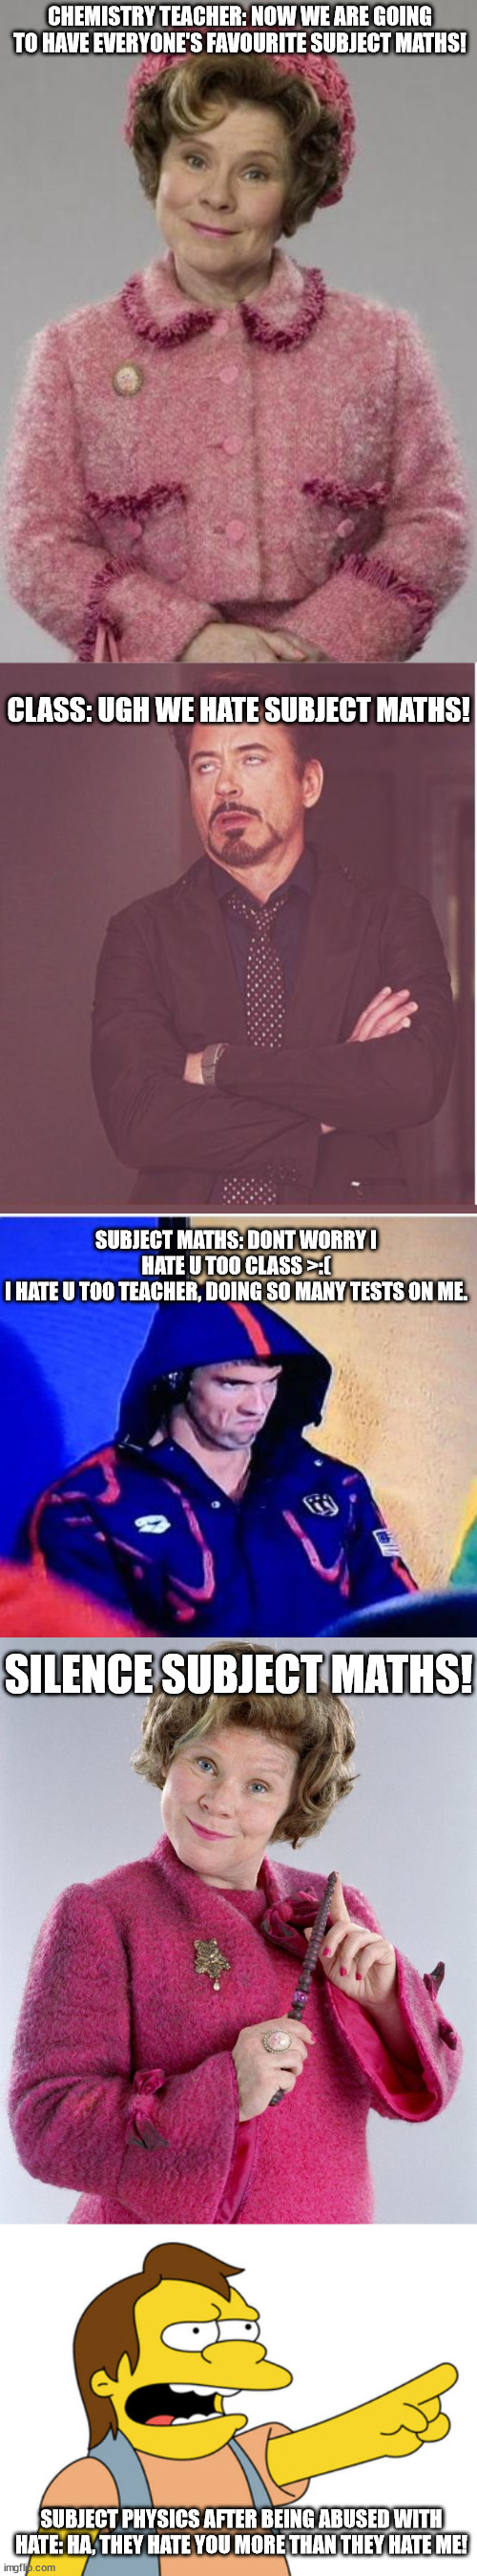 Srry for the long meme... |  CHEMISTRY TEACHER: NOW WE ARE GOING TO HAVE EVERYONE'S FAVOURITE SUBJECT MATHS! CLASS: UGH WE HATE SUBJECT MATHS! SUBJECT MATHS: DONT WORRY I HATE U TOO CLASS >:(
I HATE U TOO TEACHER, DOING SO MANY TESTS ON ME. SILENCE SUBJECT MATHS! SUBJECT PHYSICS AFTER BEING ABUSED WITH HATE: HA, THEY HATE YOU MORE THAN THEY HATE ME! | image tagged in dolores umbridge,memes,face you make robert downey jr,nelson muntz haha,got this idea while spinning around a pole at reccess | made w/ Imgflip meme maker